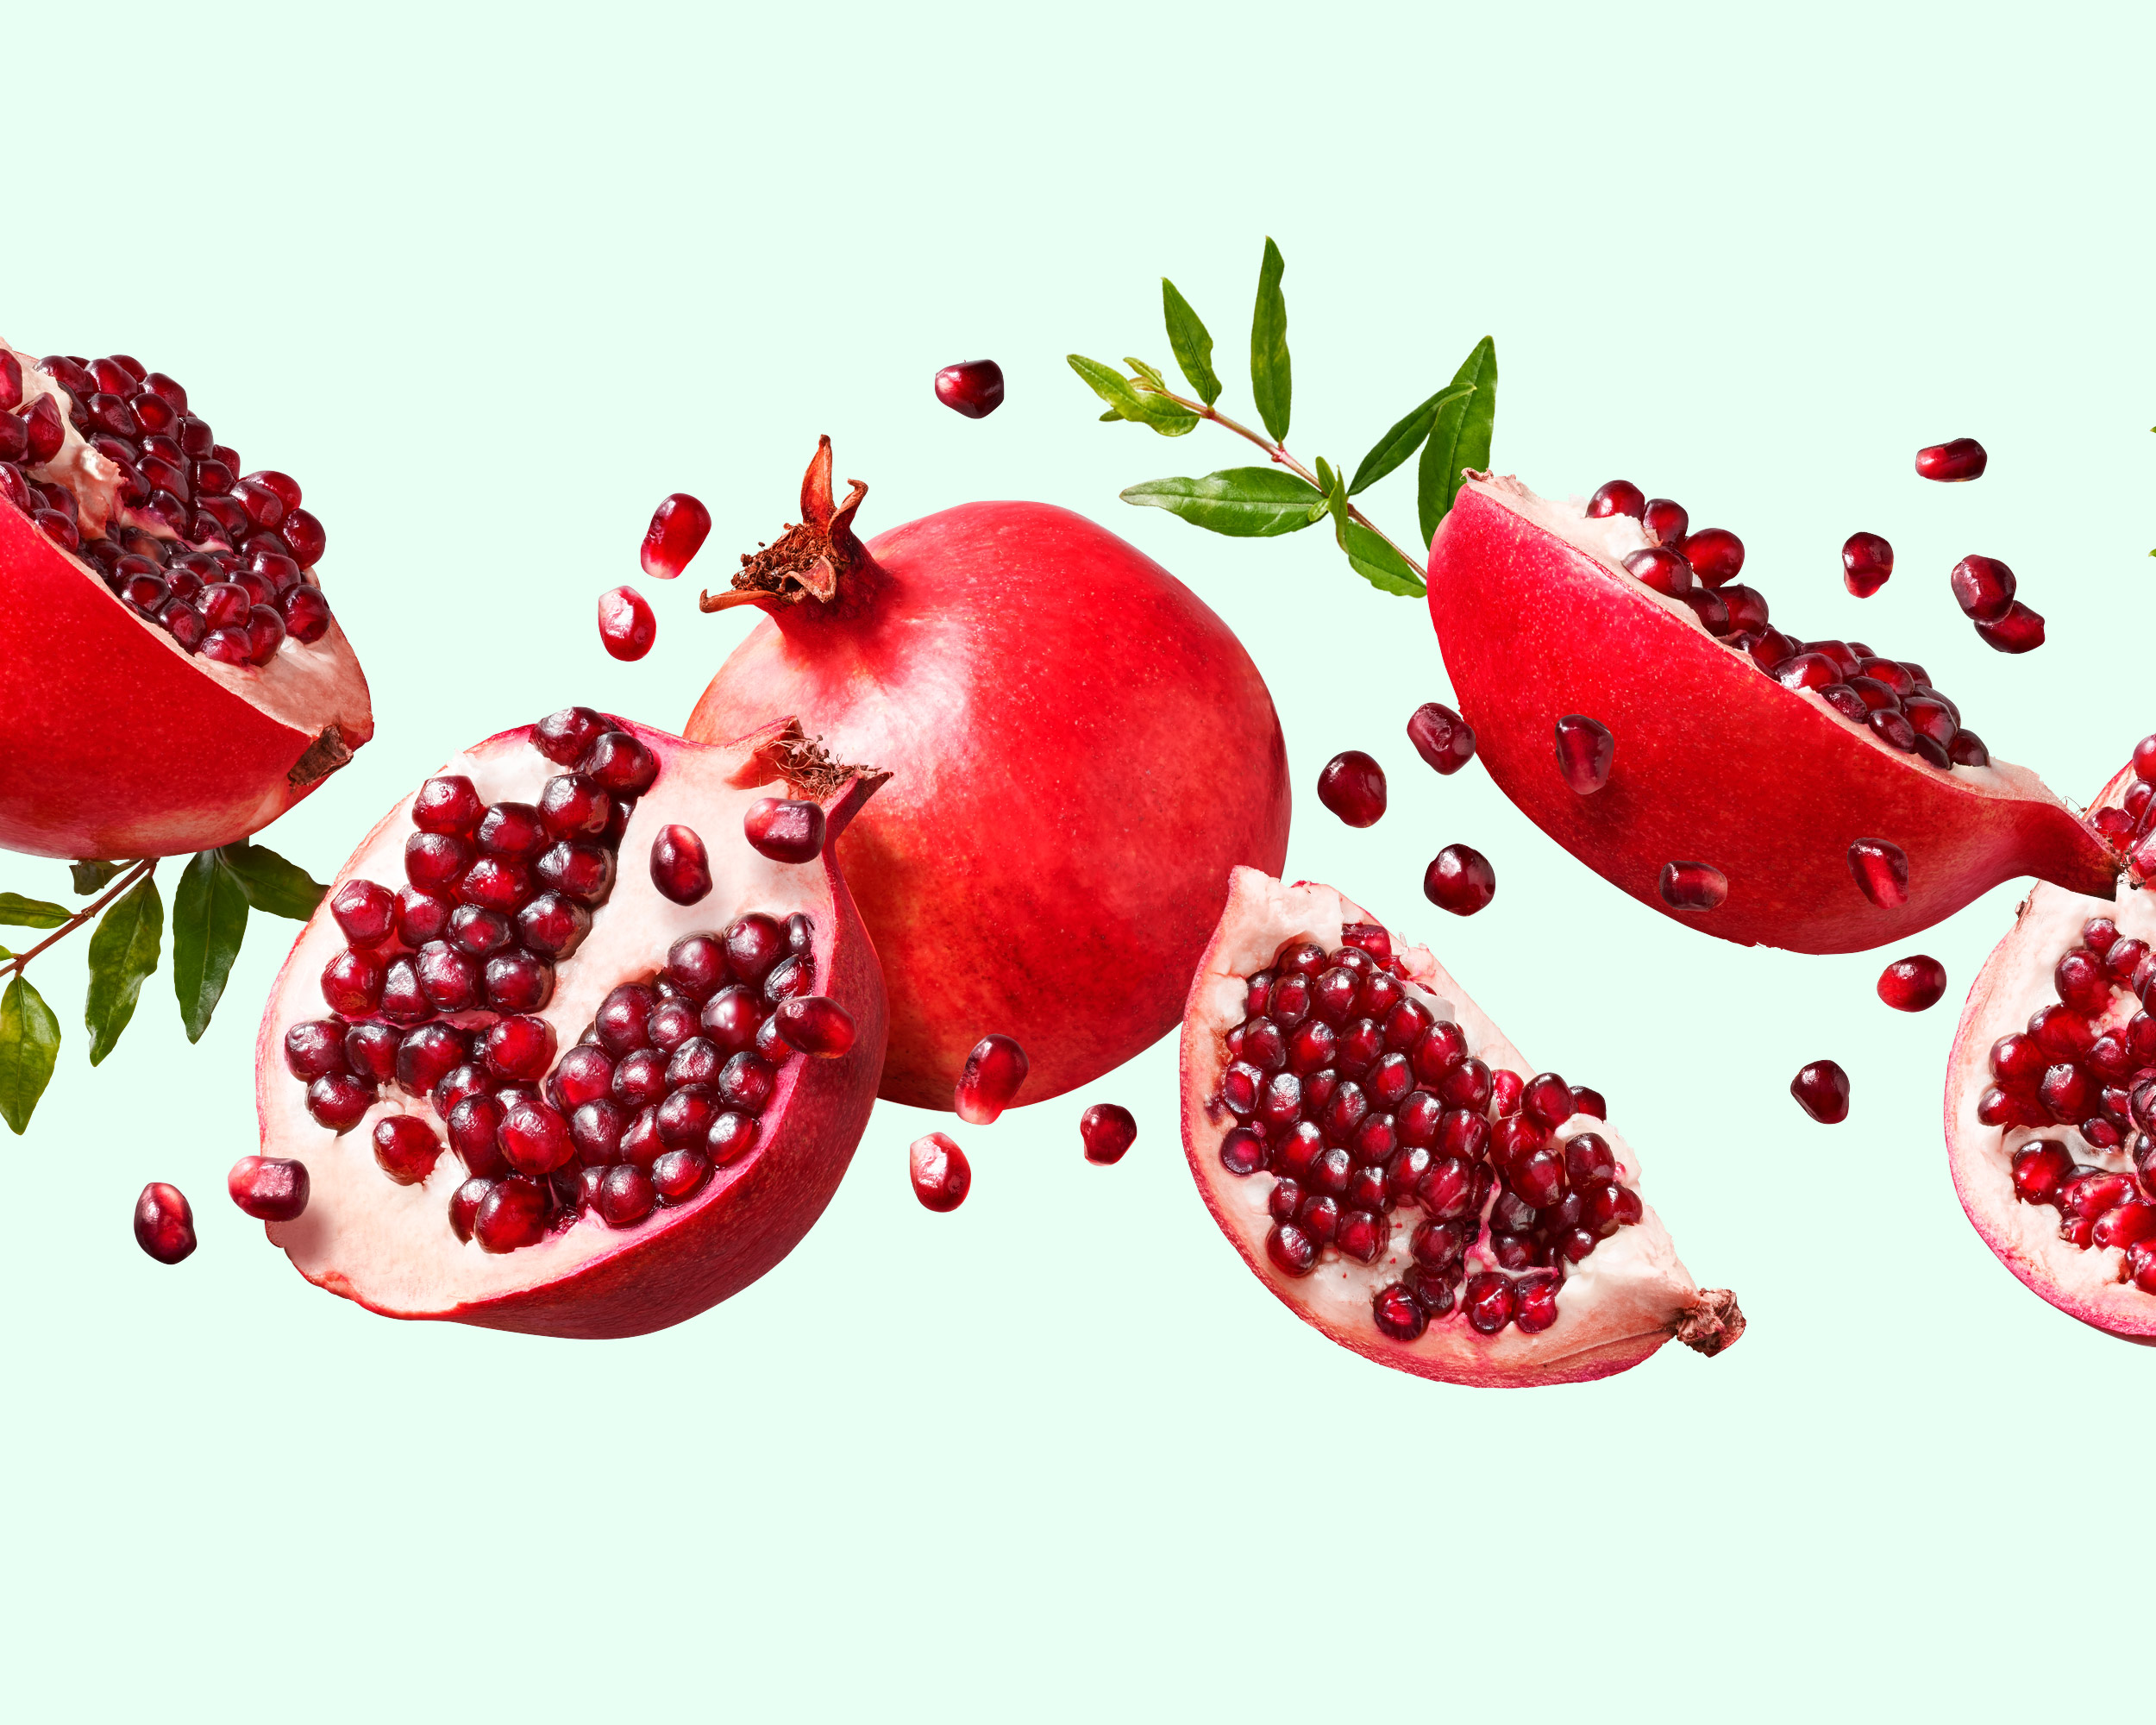 Annabelle-Breakey-Food-Photographer-BHF_Just_Pomegranate_Hero_fnl_LO_MODIFIED